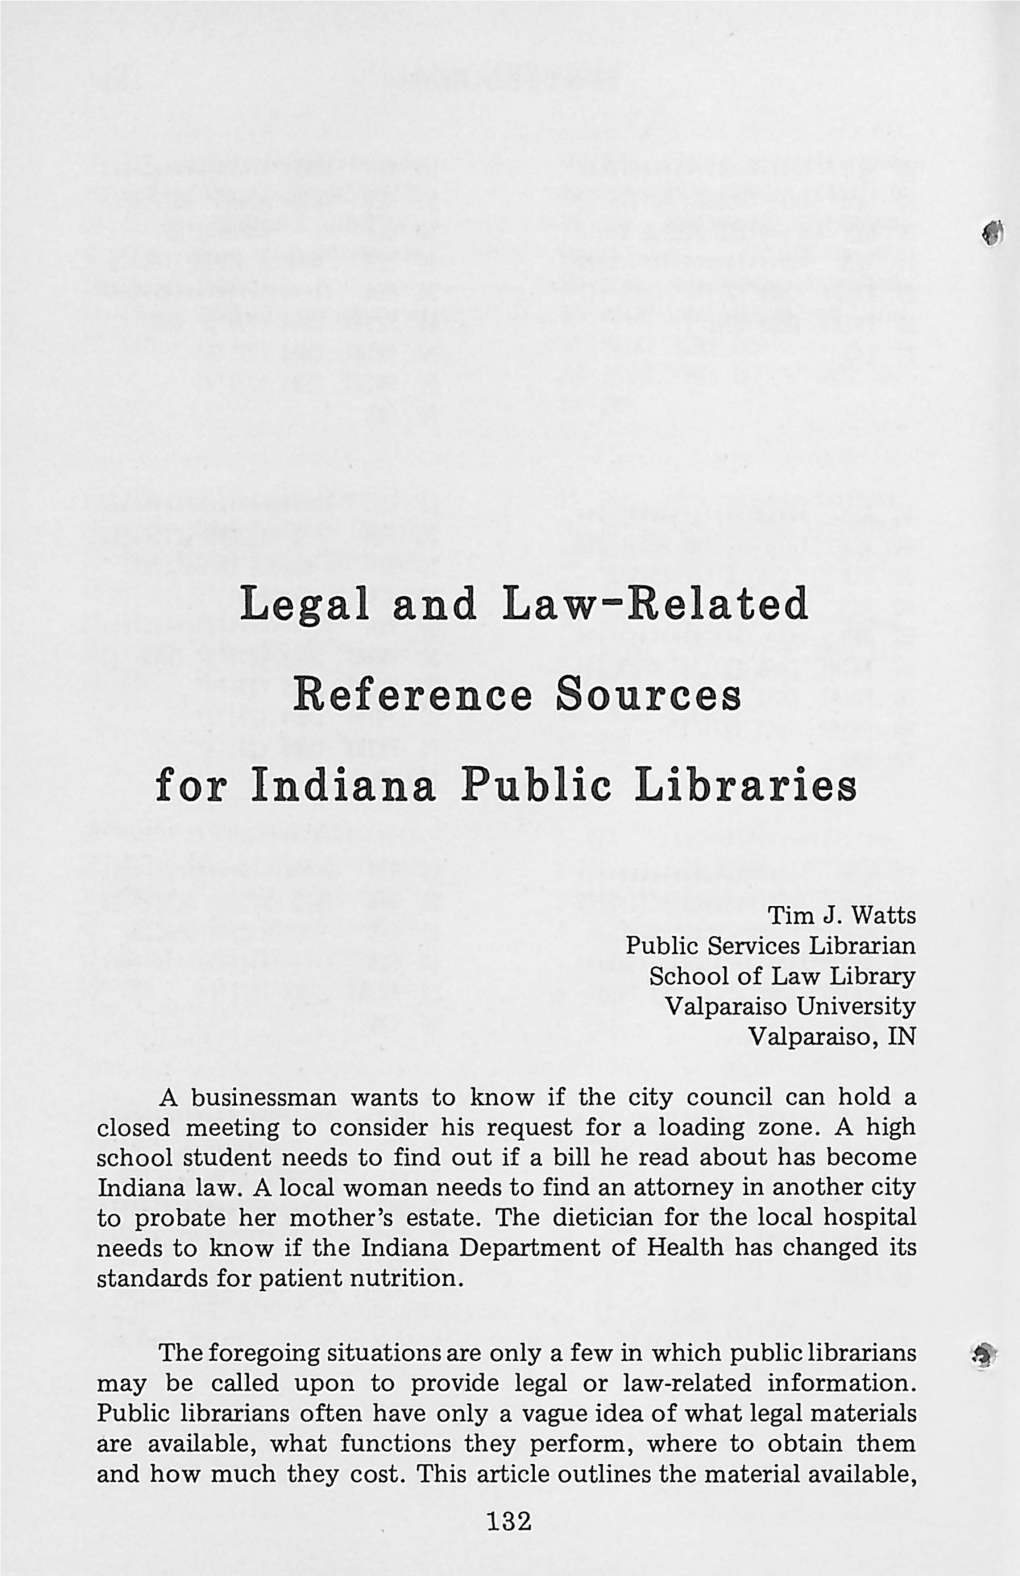 Legal and Law-Related Reference Sources for Indiana Public Libraries